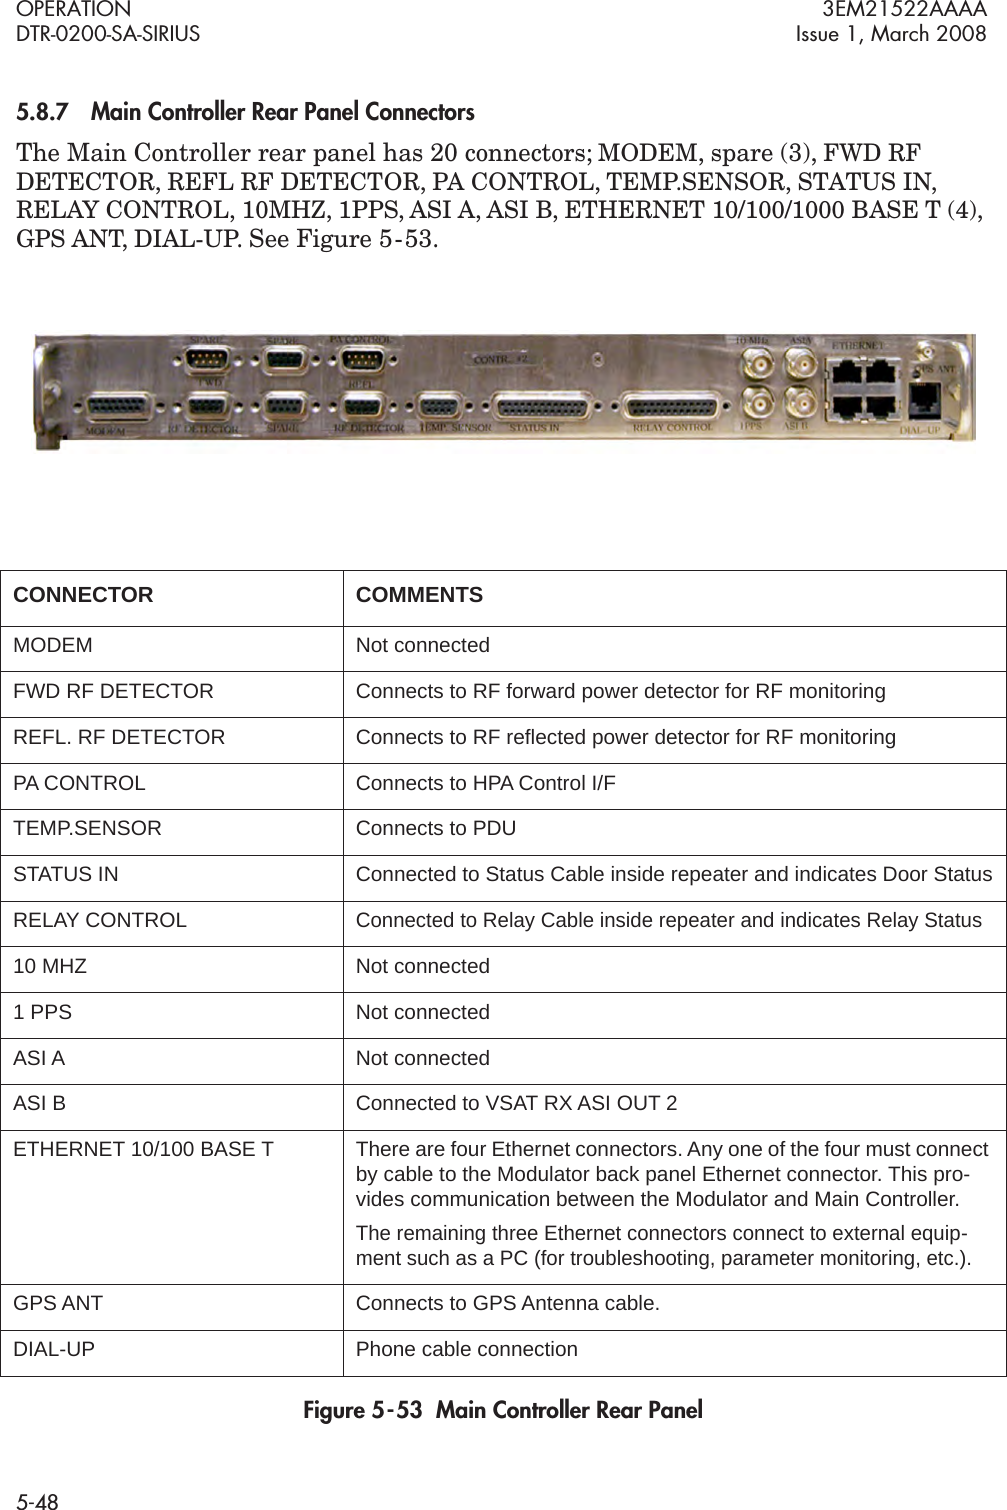 OPERATION 3EM21522AAAADTR-0200-SA-SIRIUS Issue 1, March 20085-485.8.7Main Controller Rear Panel ConnectorsThe Main Controller rear panel has 20 connectors; MODEM, spare (3), FWD RF DETECTOR, REFL RF DETECTOR, PA CONTROL, TEMP.SENSOR, STATUS IN, RELAY CONTROL, 10MHZ, 1PPS, ASI A, ASI B, ETHERNET 10/100/1000 BASE T (4), GPS ANT, DIAL-UP. See Figure 5  -  53.Figure 5  -  53  Main Controller Rear PanelCONNECTOR COMMENTSMODEM Not connectedFWD RF DETECTOR Connects to RF forward power detector for RF monitoringREFL. RF DETECTOR Connects to RF reflected power detector for RF monitoringPA CONTROL Connects to HPA Control I/FTEMP.SENSOR Connects to PDUSTATUS IN Connected to Status Cable inside repeater and indicates Door StatusRELAY CONTROLConnected to Relay Cable inside repeater and indicates Relay Status10 MHZ Not connected1 PPS Not connectedASI A Not connectedASI B Connected to VSAT RX ASI OUT 2ETHERNET 10/100 BASE T There are four Ethernet connectors. Any one of the four must connect by cable to the Modulator back panel Ethernet connector. This pro-vides communication between the Modulator and Main Controller.The remaining three Ethernet connectors connect to external equip-ment such as a PC (for troubleshooting, parameter monitoring, etc.).GPS ANT Connects to GPS Antenna cable.DIAL-UP Phone cable connection